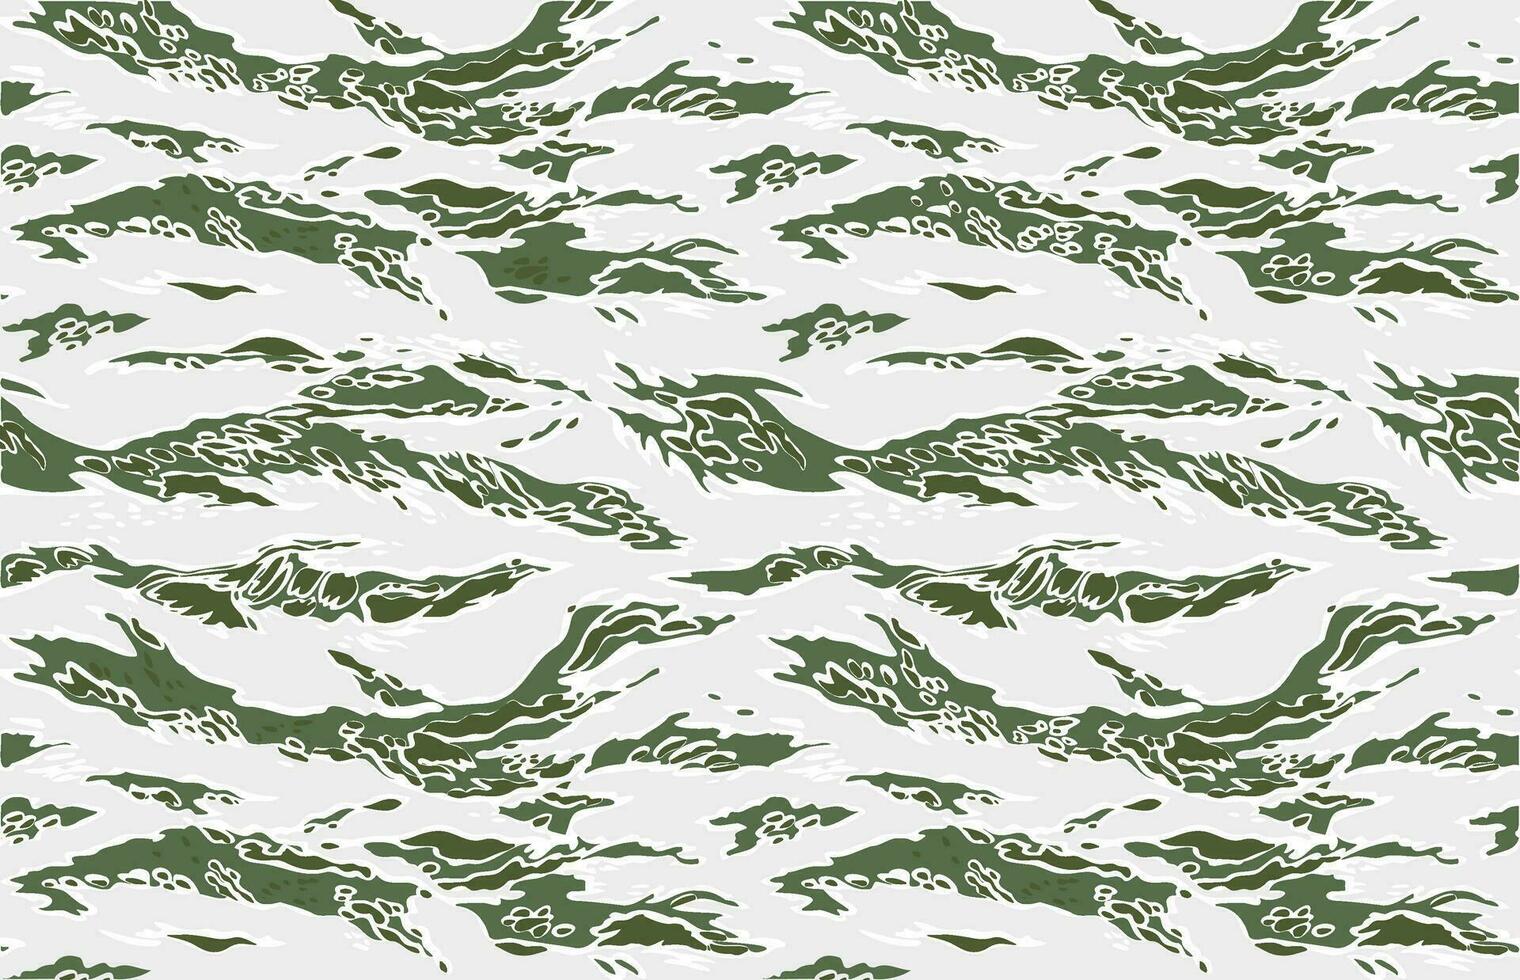 Arctic Tigerstripe Camouflage Vector Seamless Pattern